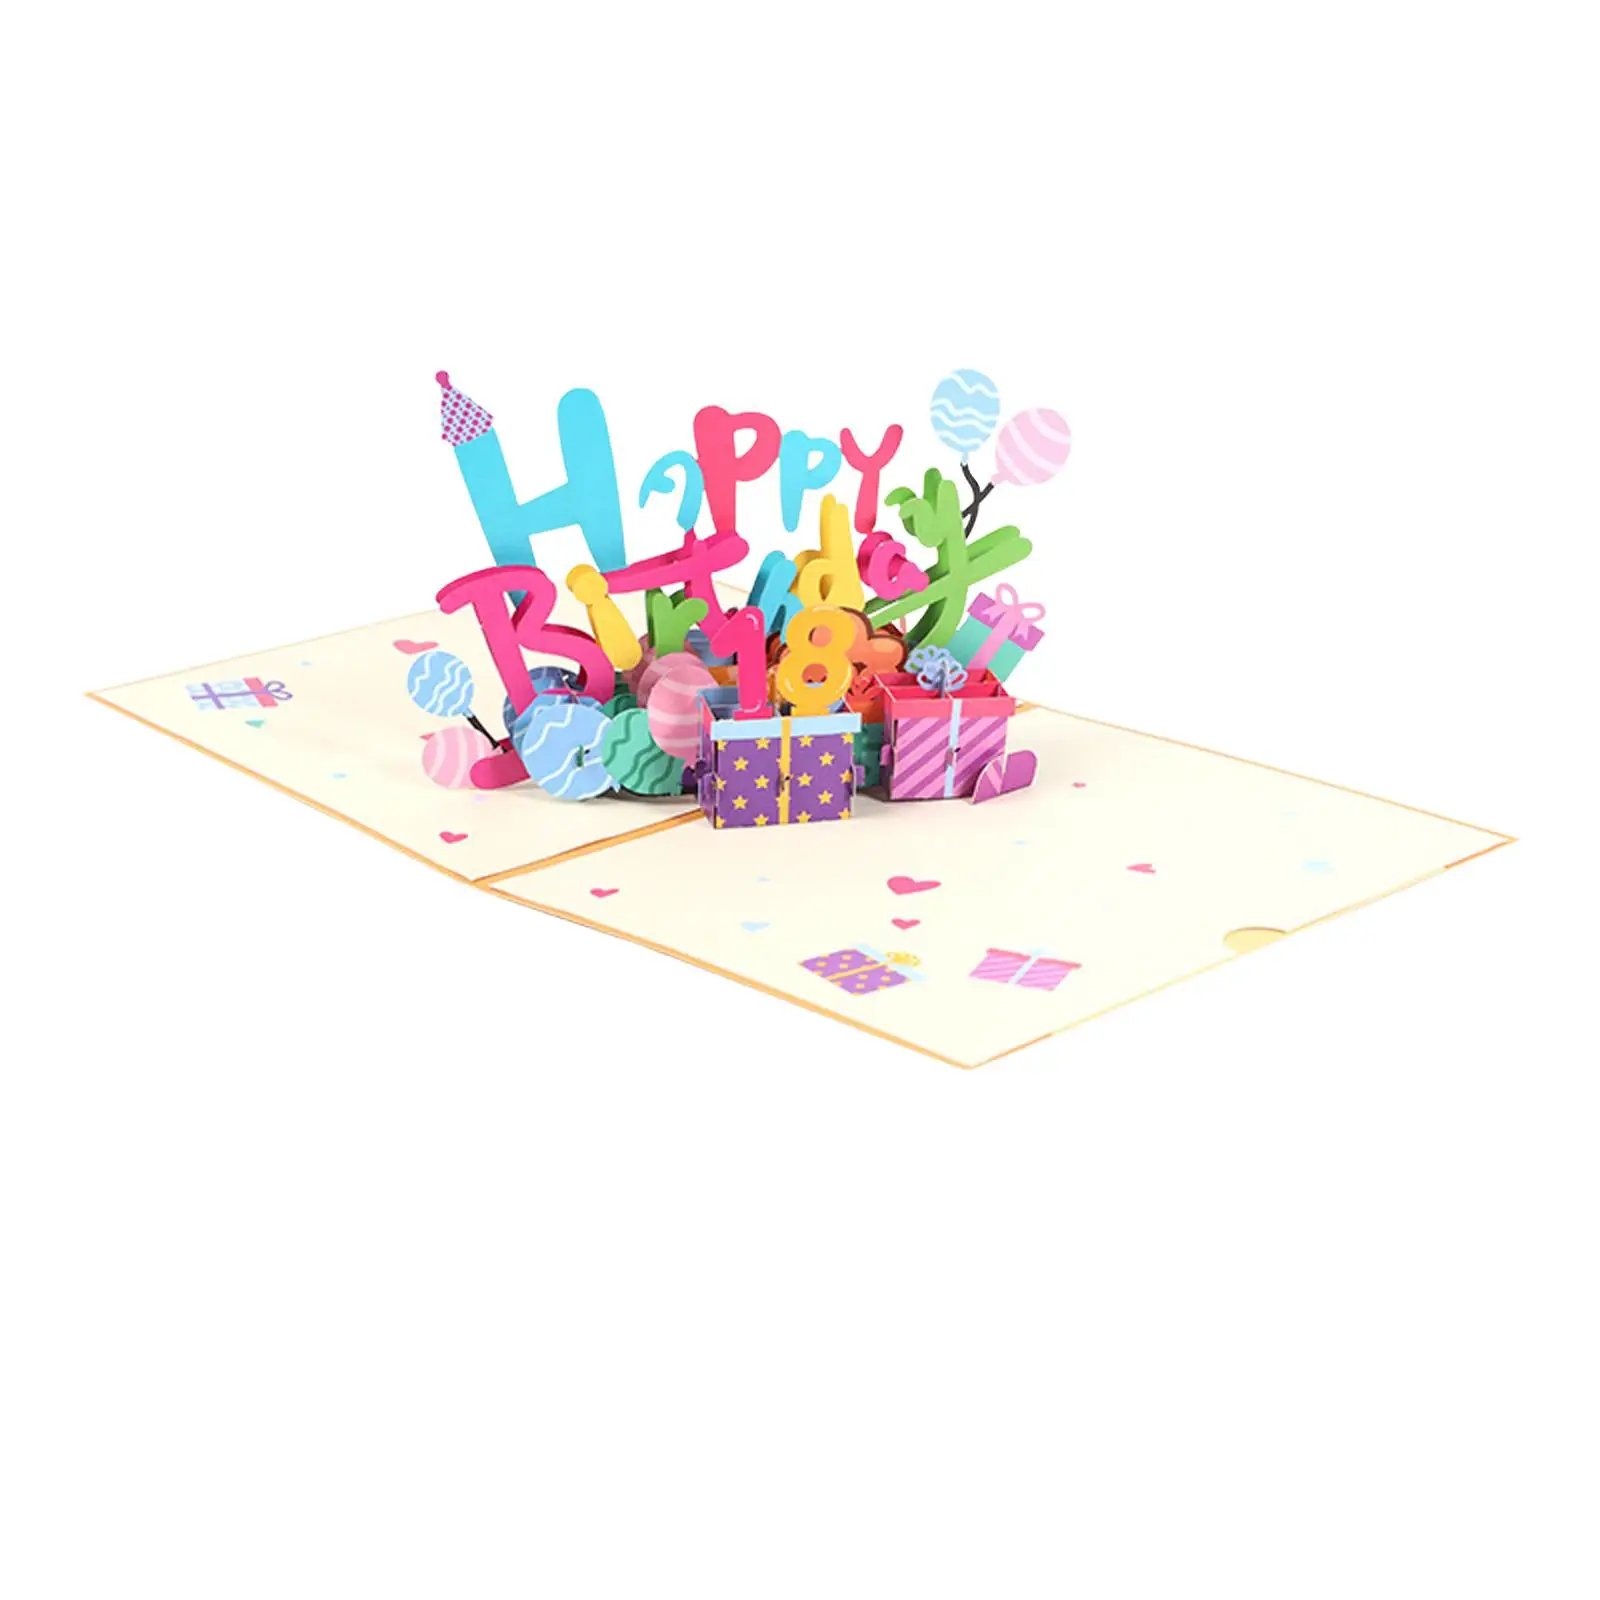 Happy Birthday Card Birthday Greeting Cards for Adult and Kid, Pop up Birthday Cards Happy Birthday Pop up Card with Note Card